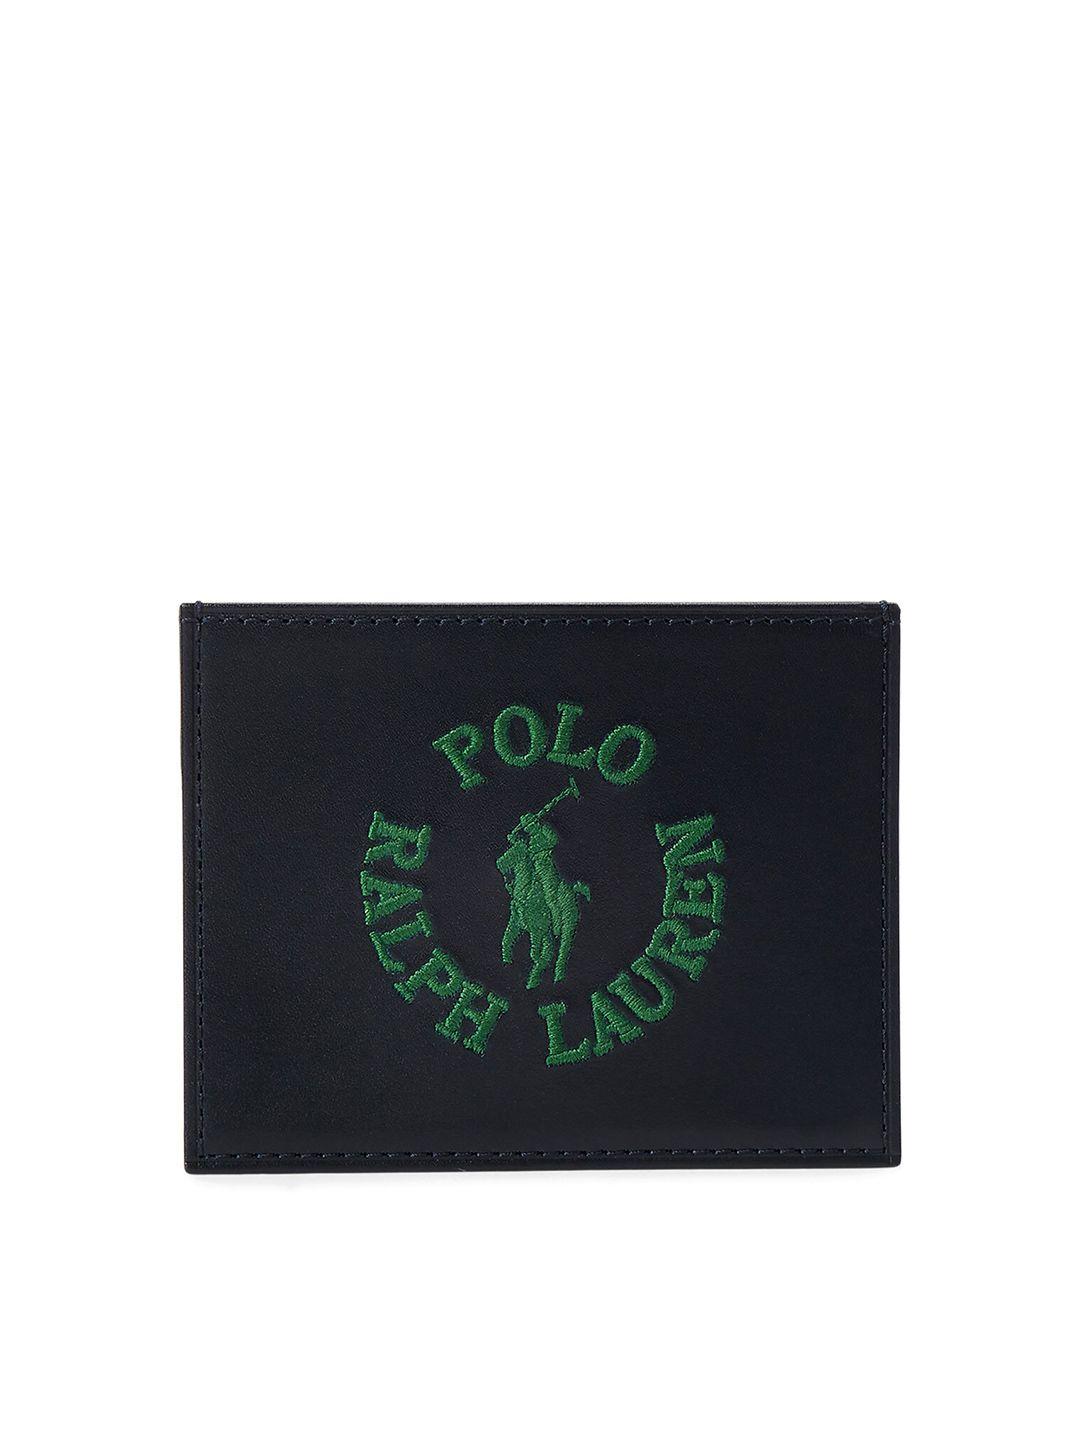 polo-ralph-lauren-men-brand-logo-embroidered-nappa-leather-card-case